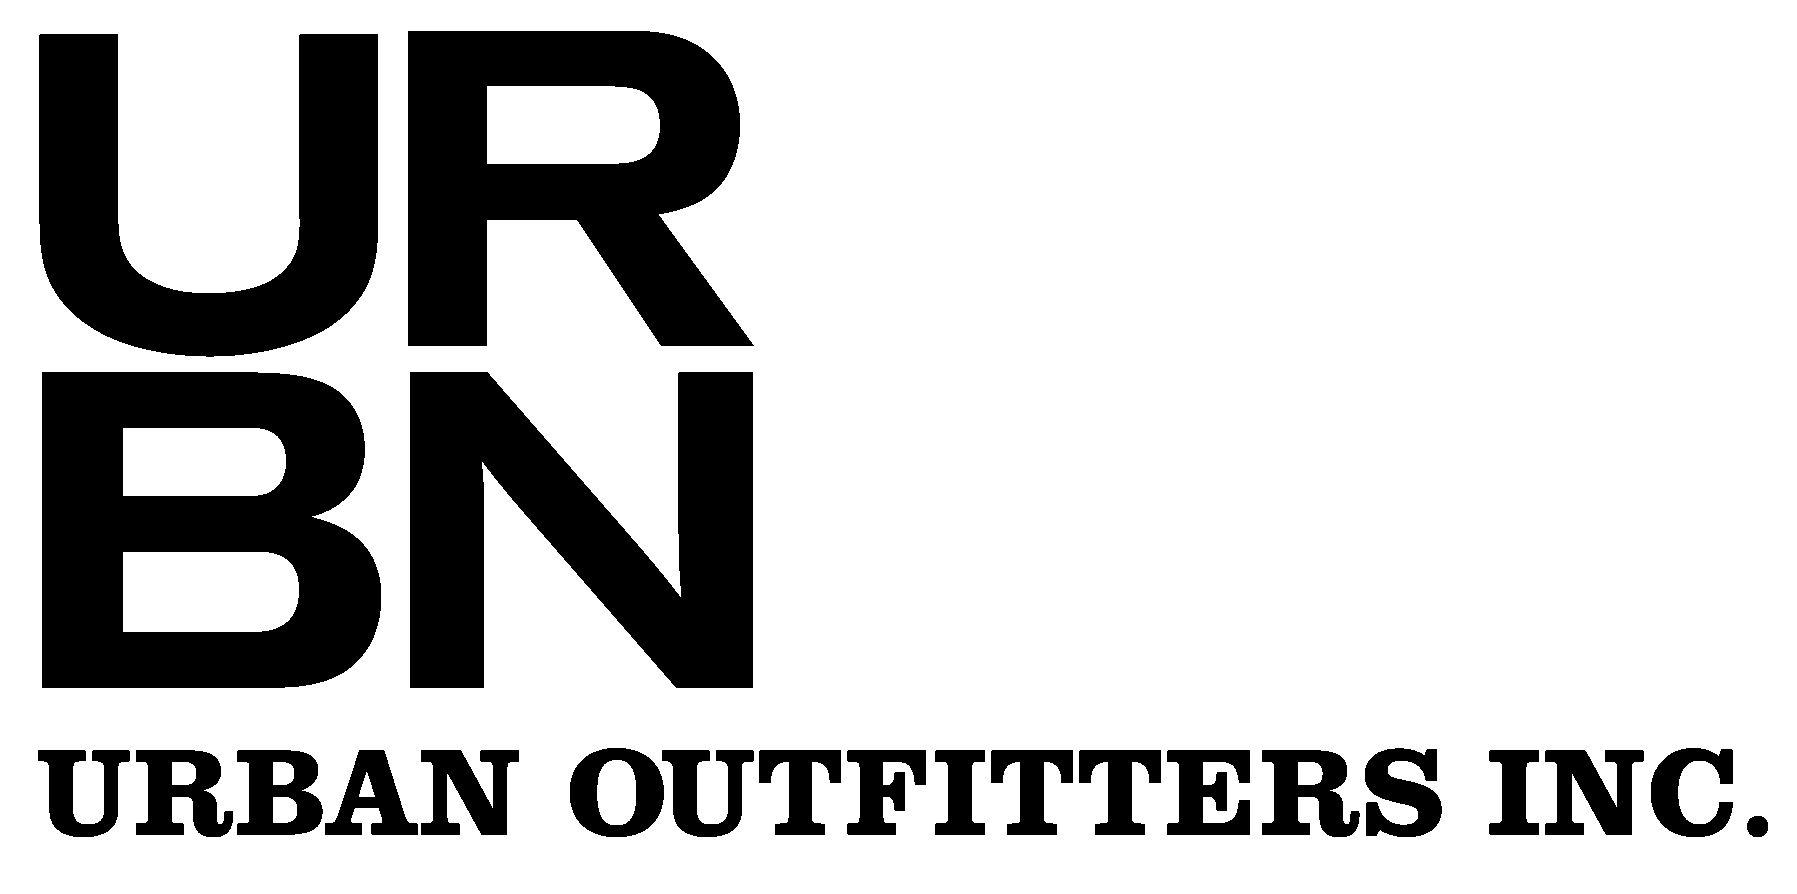 Urban Outfitters Logo - urban outfitters logo Customer Service Contact Numbers Lists